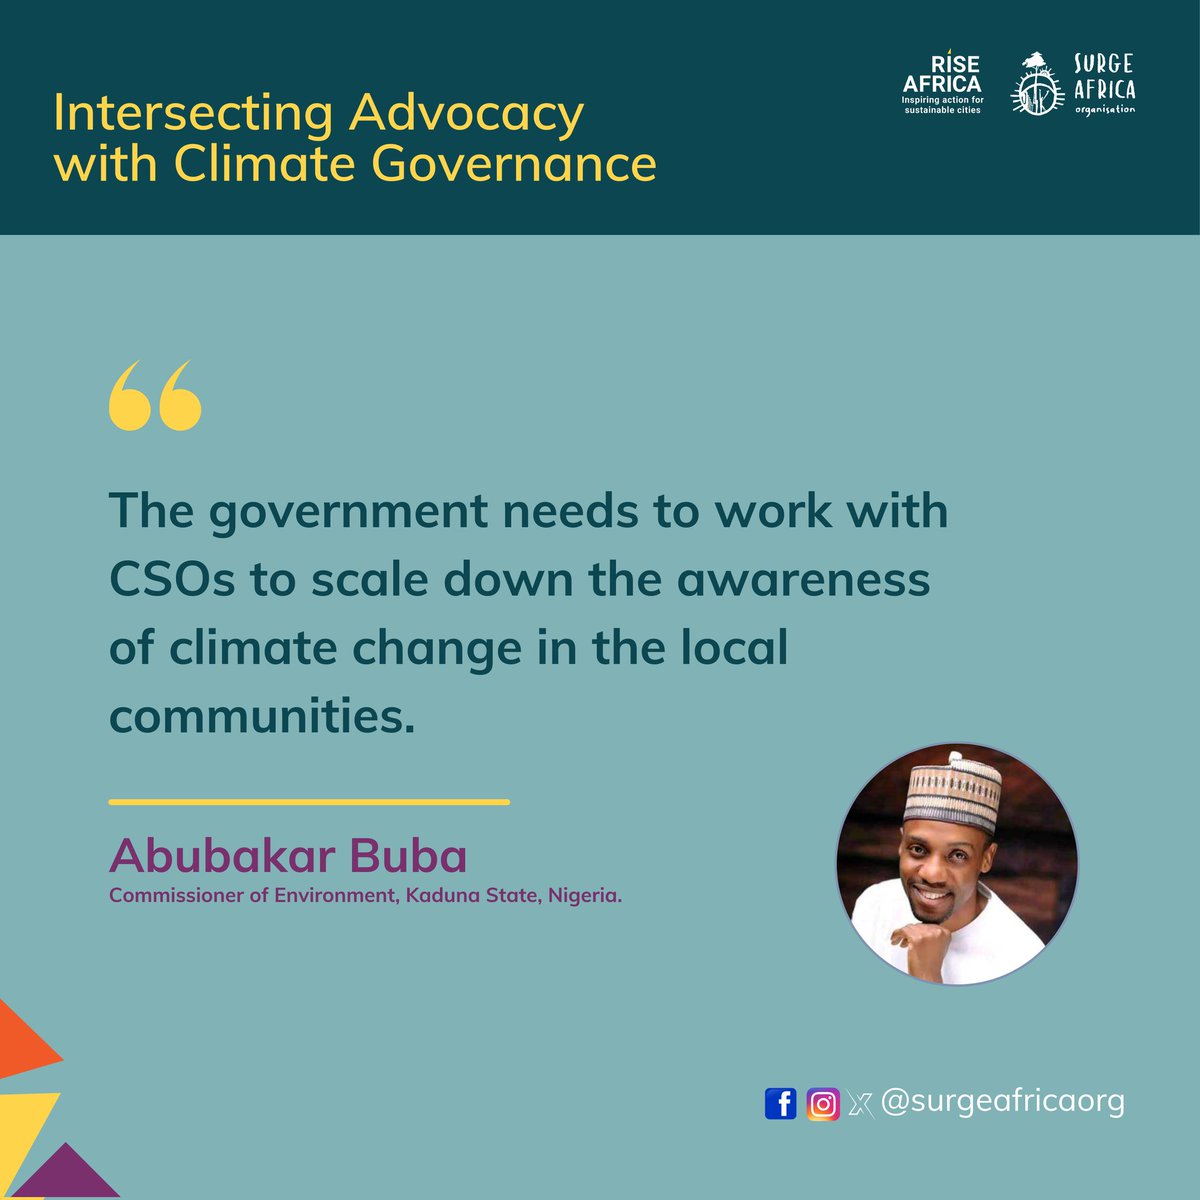 The Government and CSOs have to work together to achieve climate change goals.👌 #SurgeAfricaOrg #SolutionOnly #RISEAfrica2024